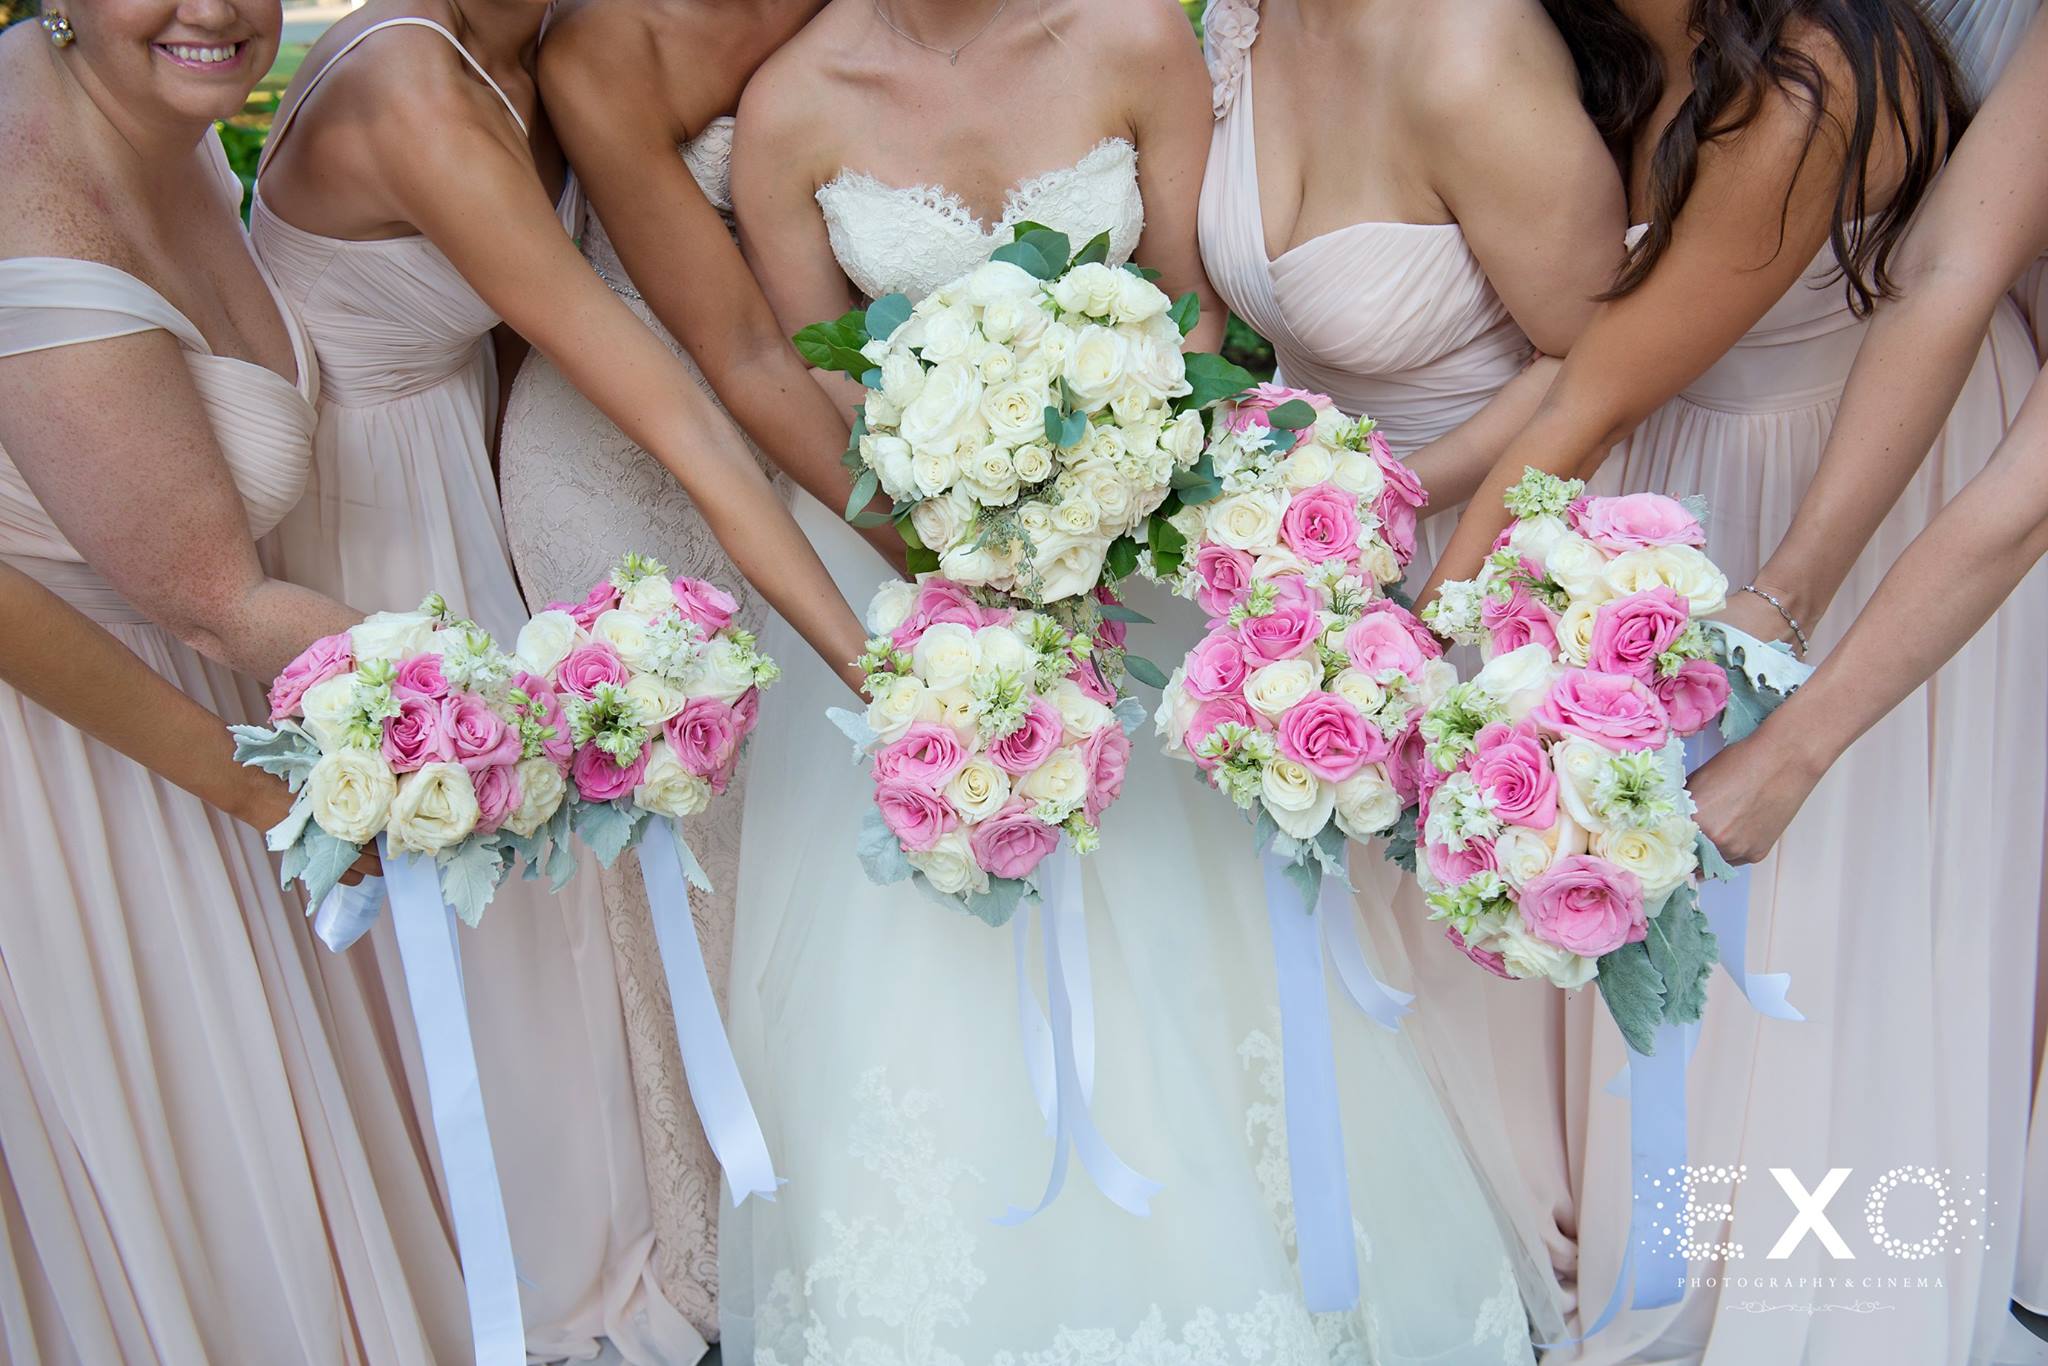 bridesmaids dresses from bridal reflections and florals from dalsimer, spitz and peck